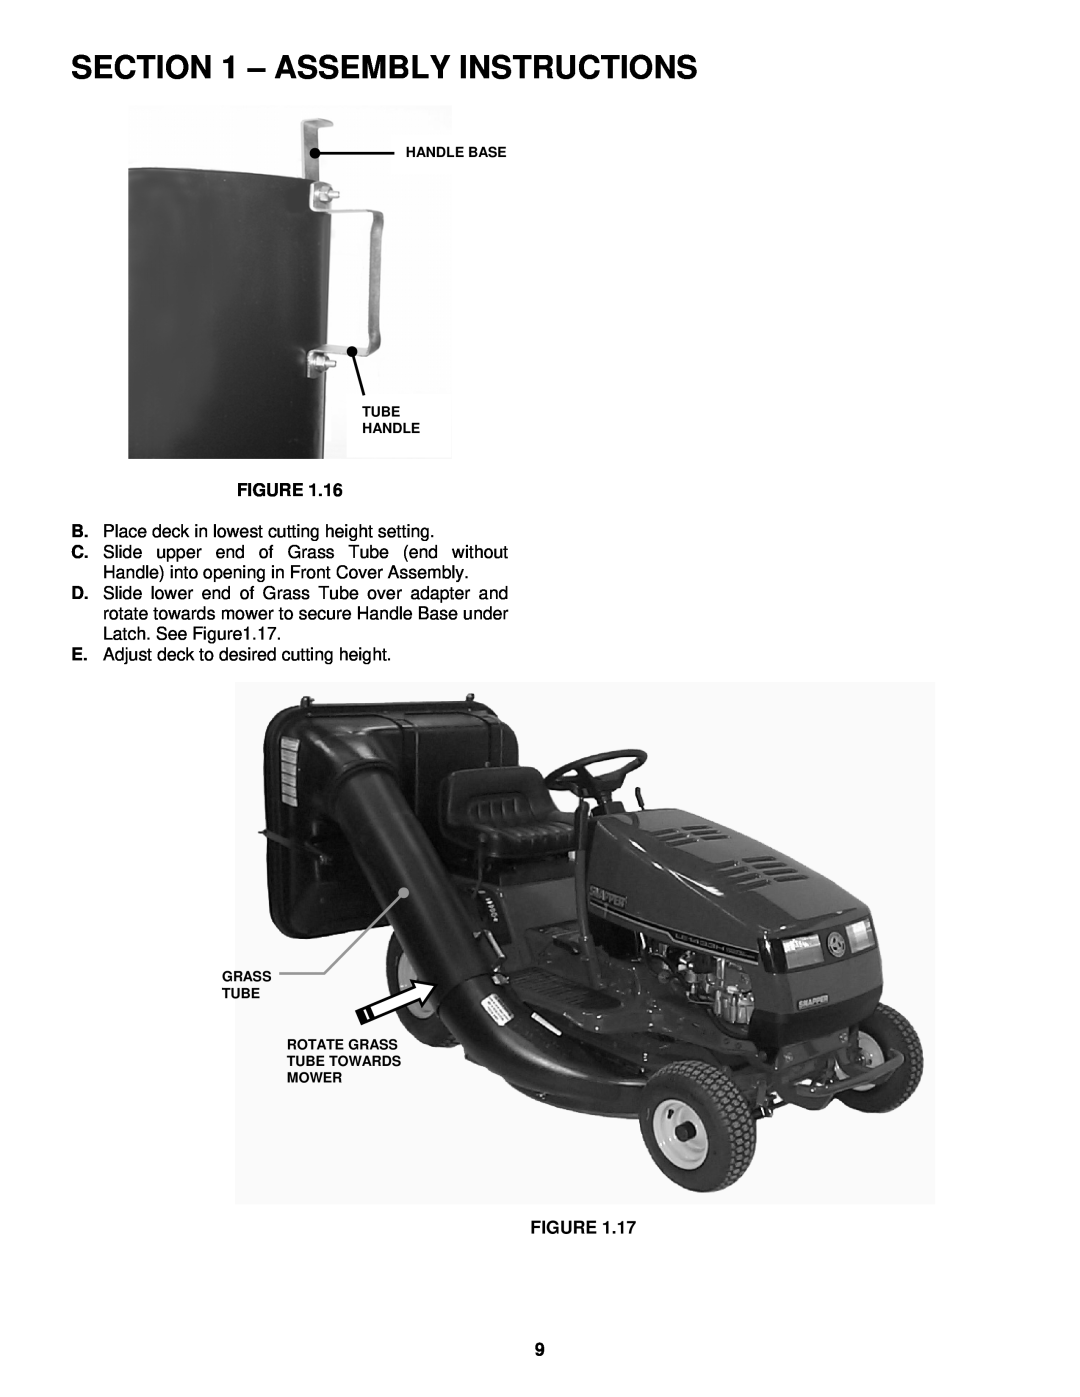 Snapper 6-3131 manual Assembly Instructions, B. Place deck in lowest cutting height setting, Handle Base Tube Handle 